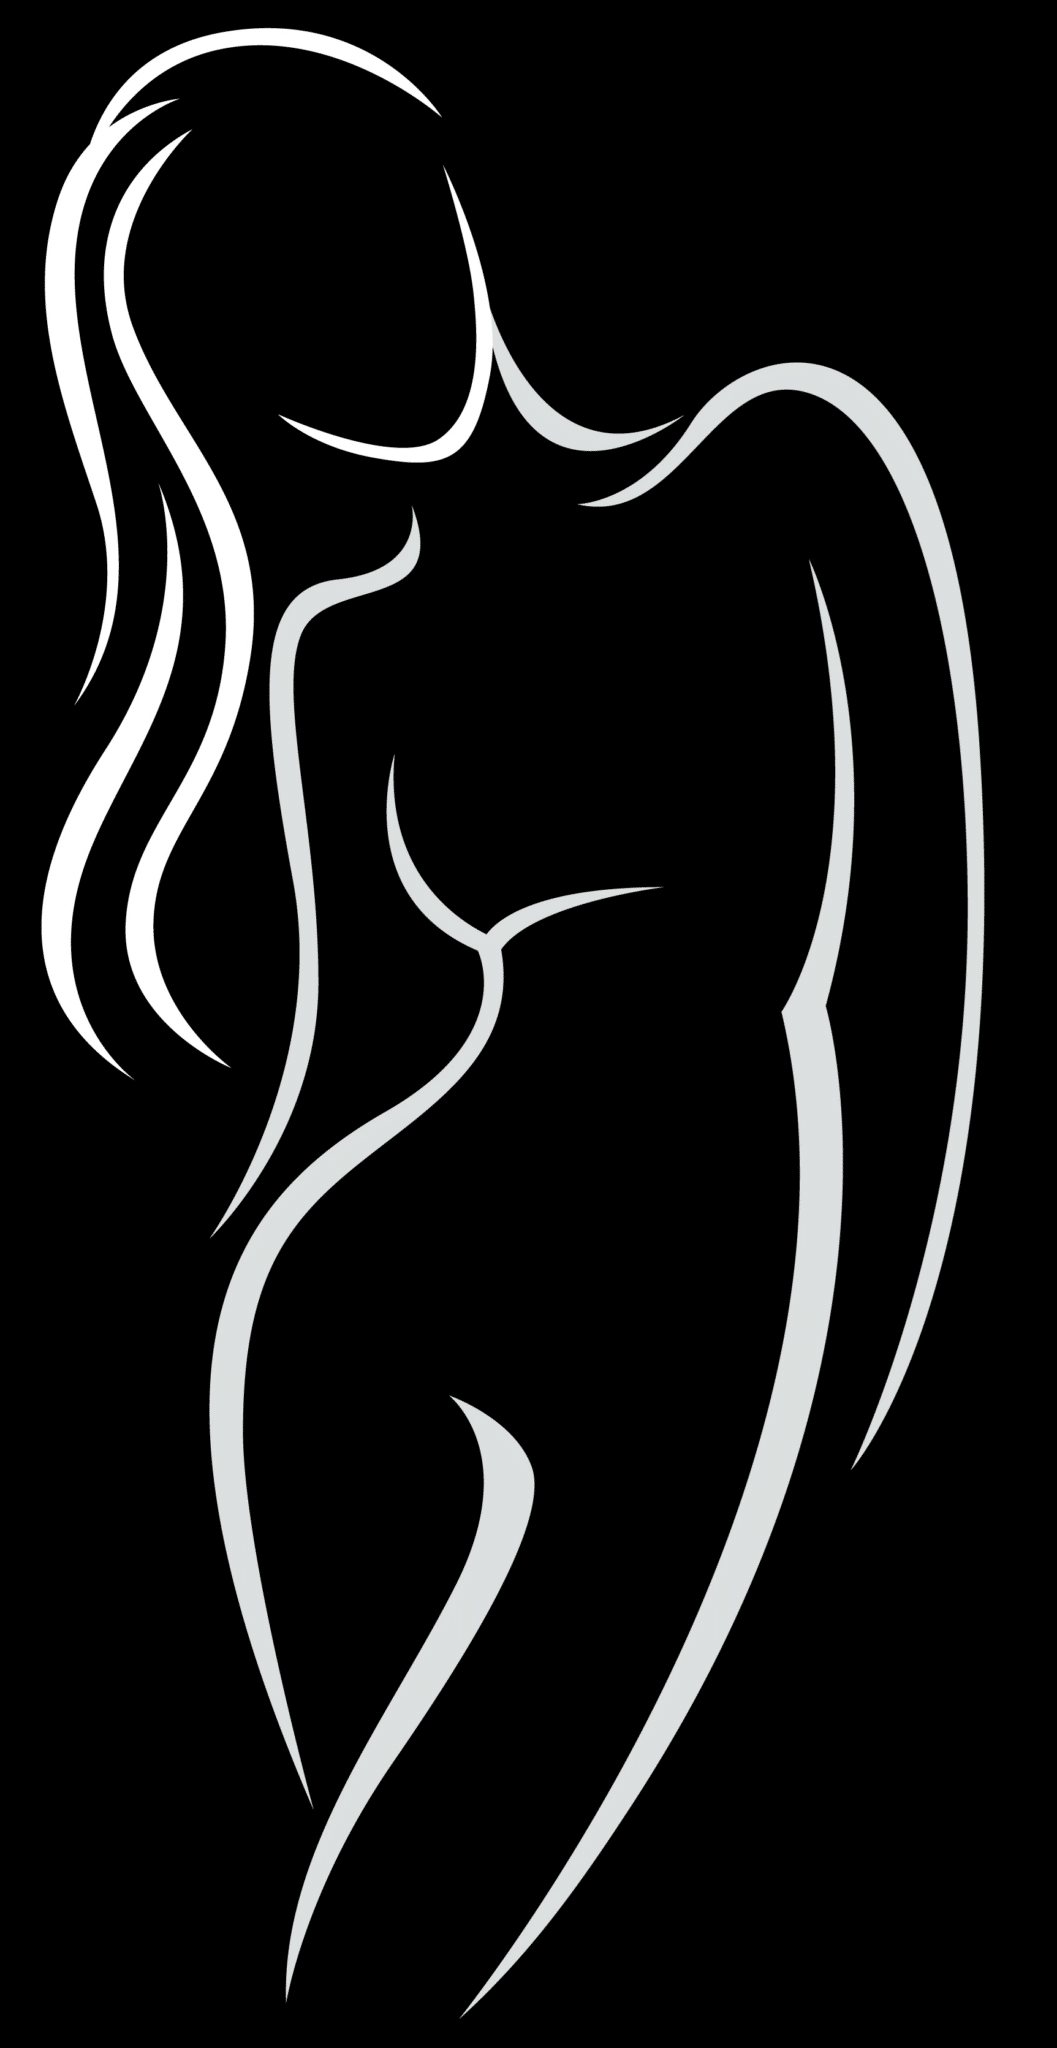 black background with white silhouette illustration of a woman